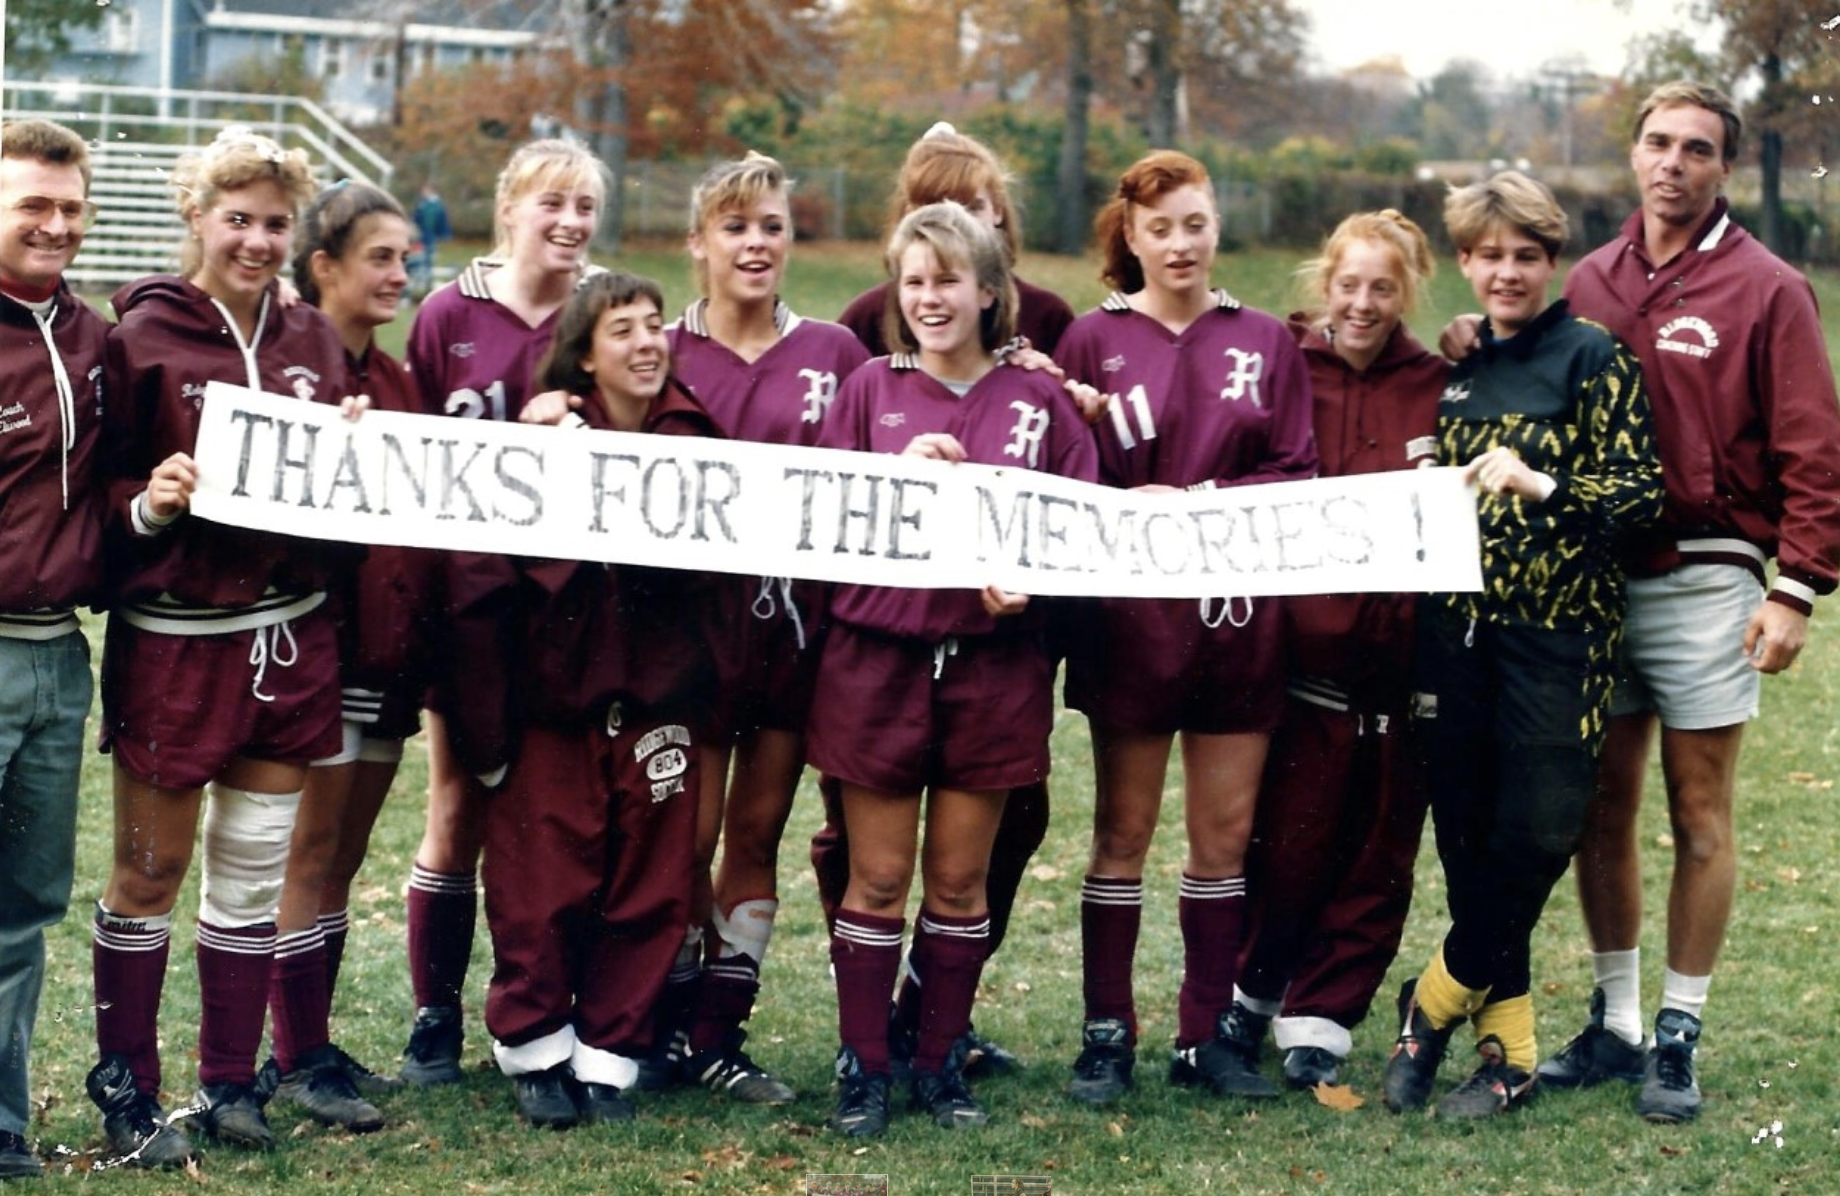 1990 Girls’ Soccer TeamAfter capturing the league championship at in a hard-fought match at Montclair 1-0. It was also the last game of the season, thus the little sign. The girls in the photo were the seniors on the team playing in their last match at RHS.